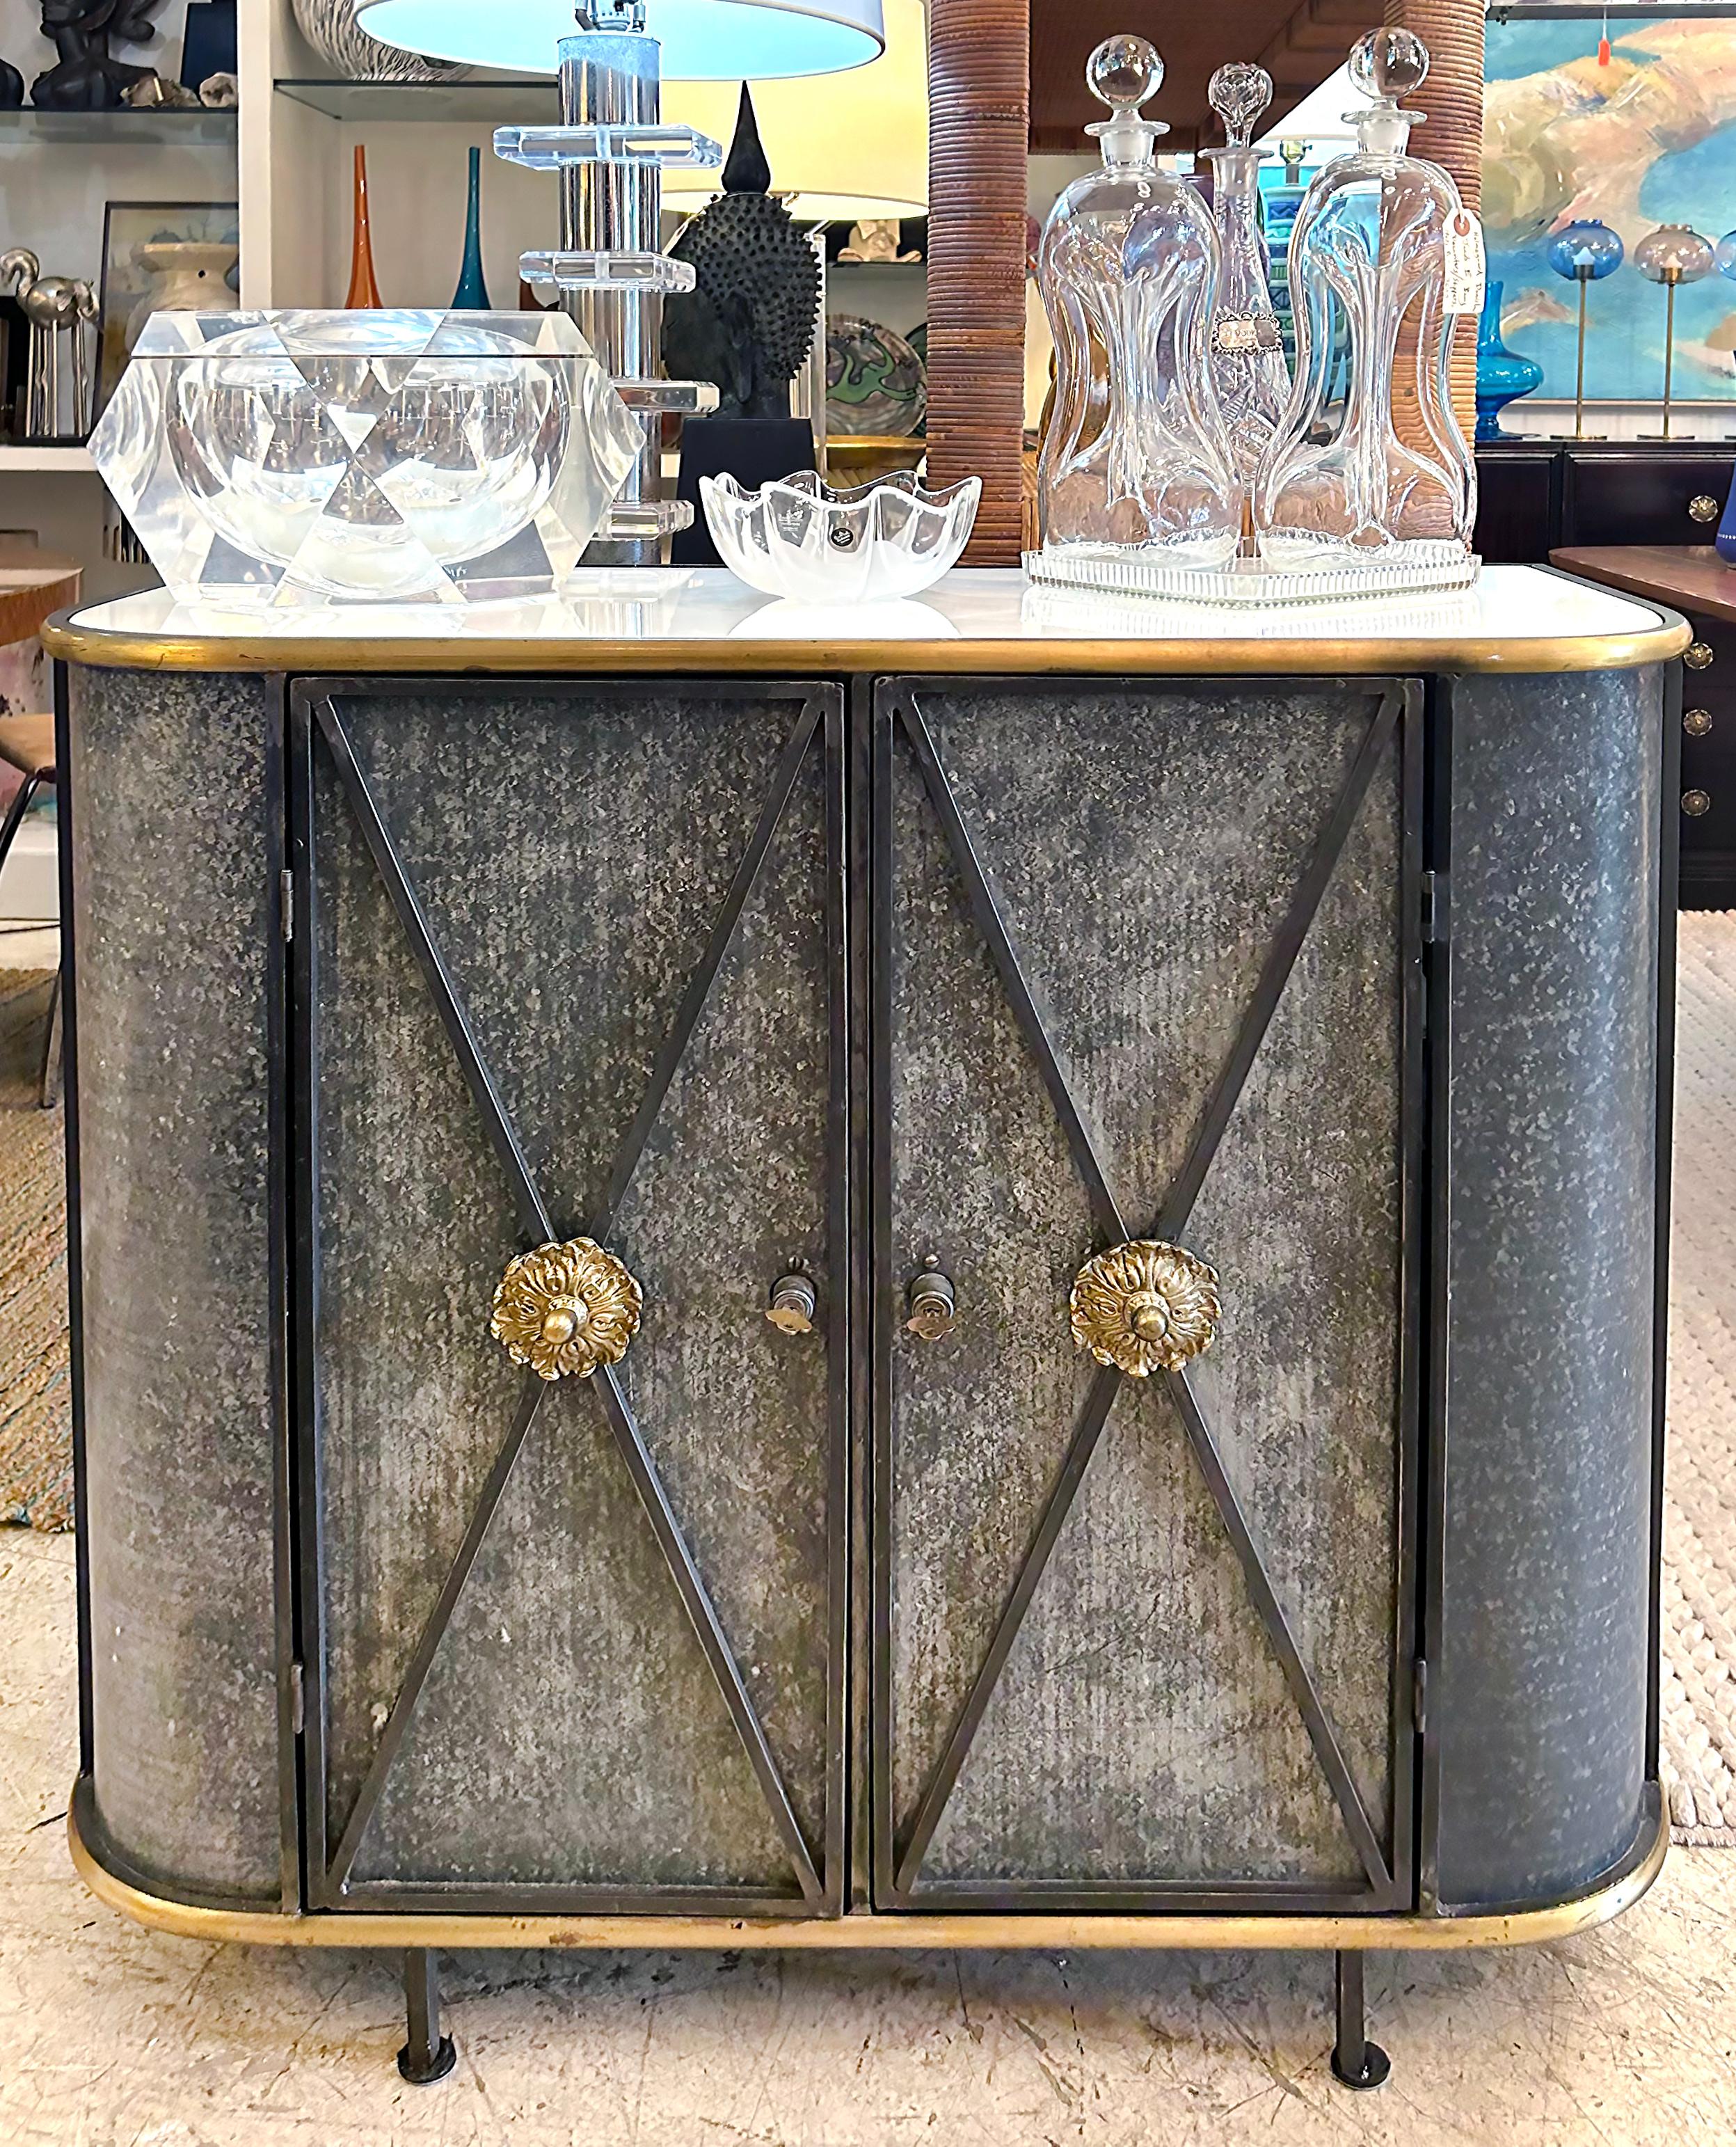 Vintage Neo-classical Iron, Brass, Metal 2-door Cabinet or Dry Bar, Glass Top 

Offered for sale is a Mid-20th century neo-classical style wrought iron, brass, and metal two-door cabinet with an inset milk glass top. The 2 doors open to reveal ample